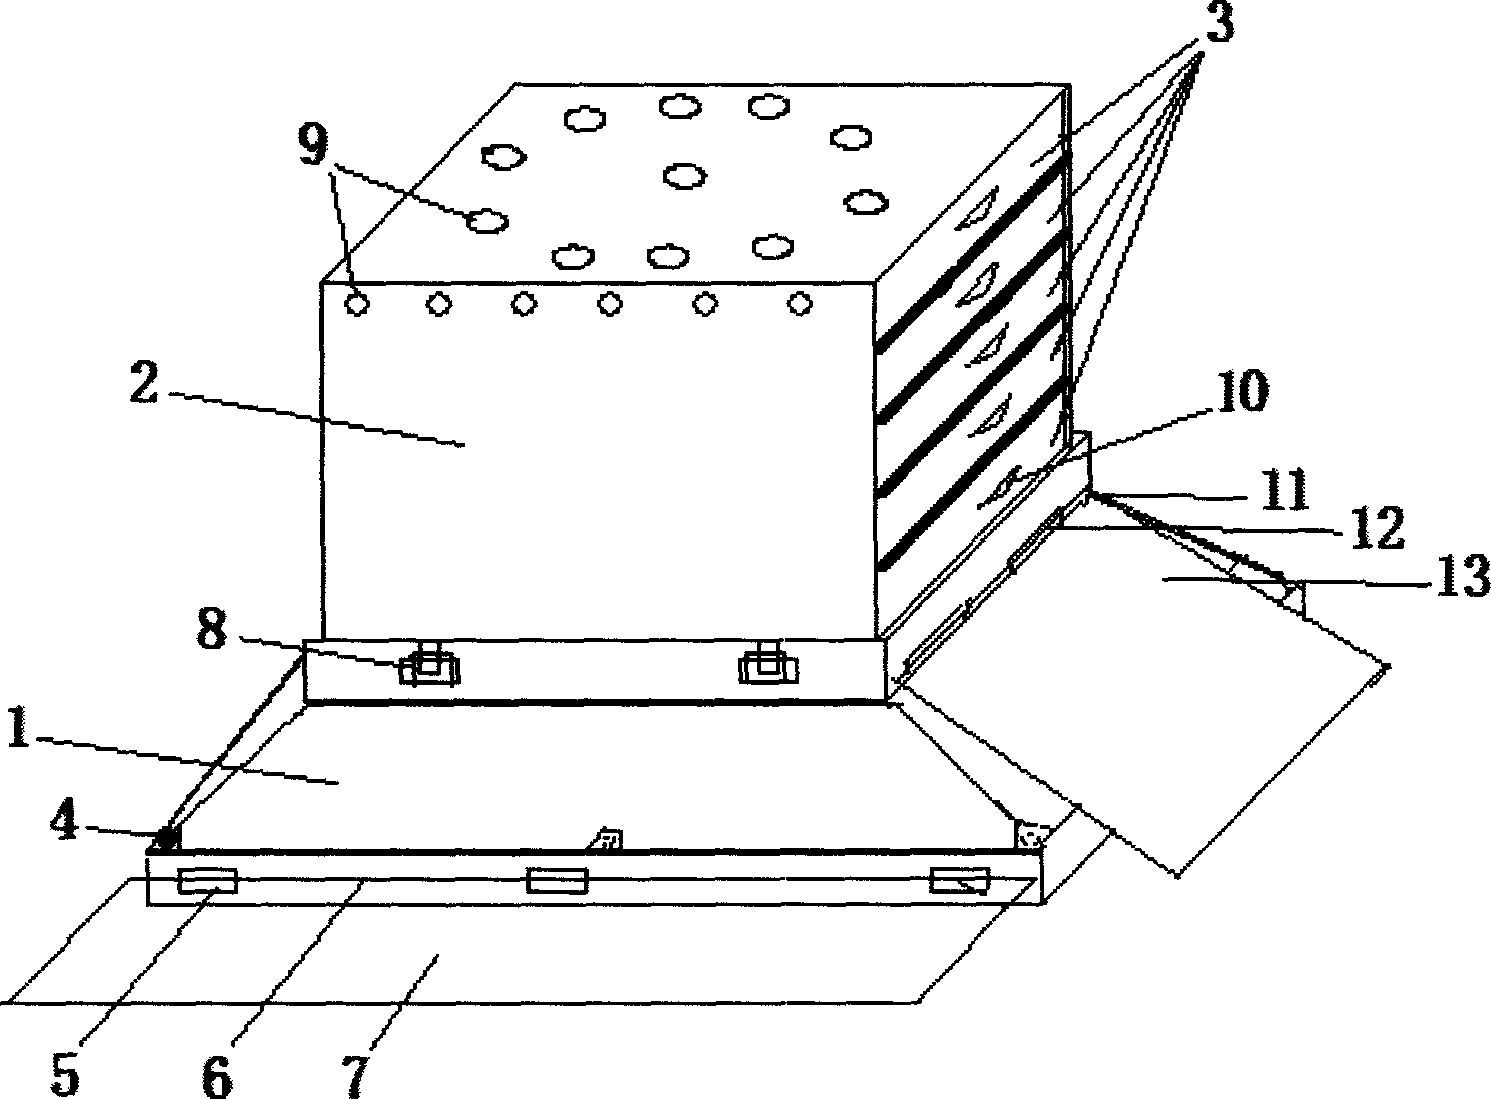 Combined piping guide filtering device